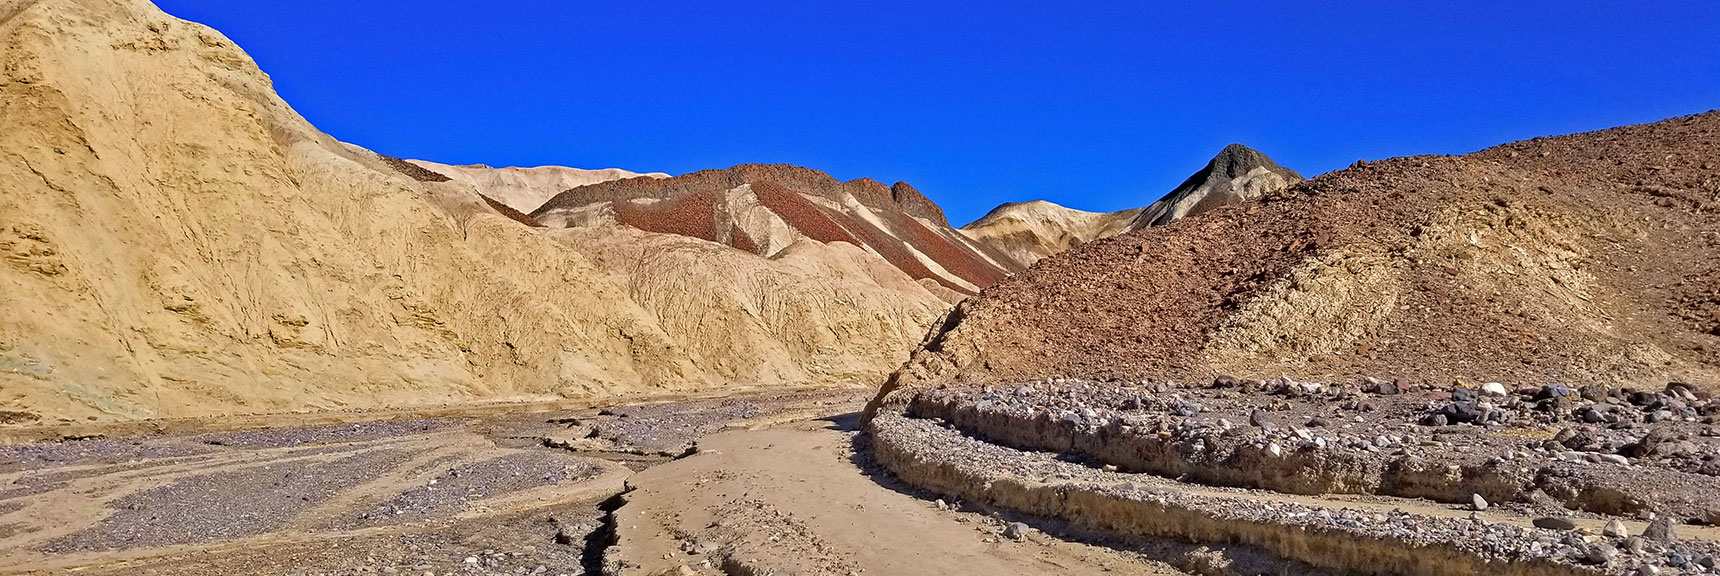 Main Section of Gower Gulch is Wide. Canyon Narrows at Upper and Lower End. | Golden Canyon to Zabriskie Point | Death Valley National Park, California